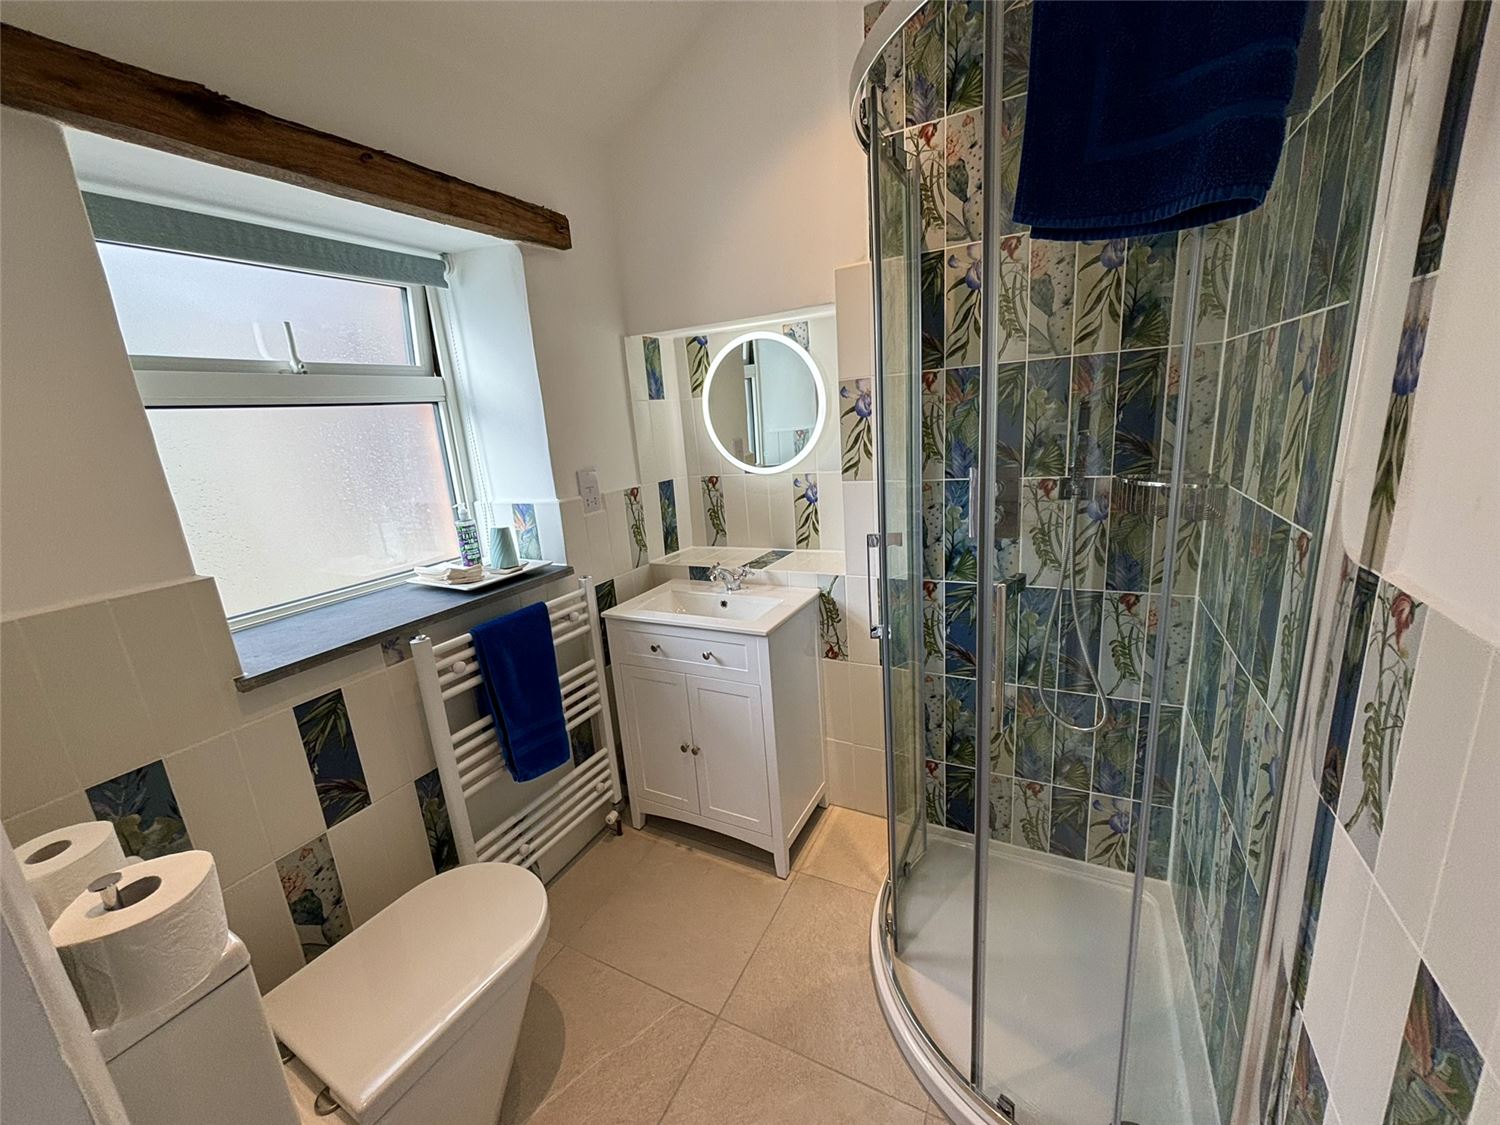 Seaberry cottage has a lovely, bright and funky bathroom. Cornwall holiday accommodation